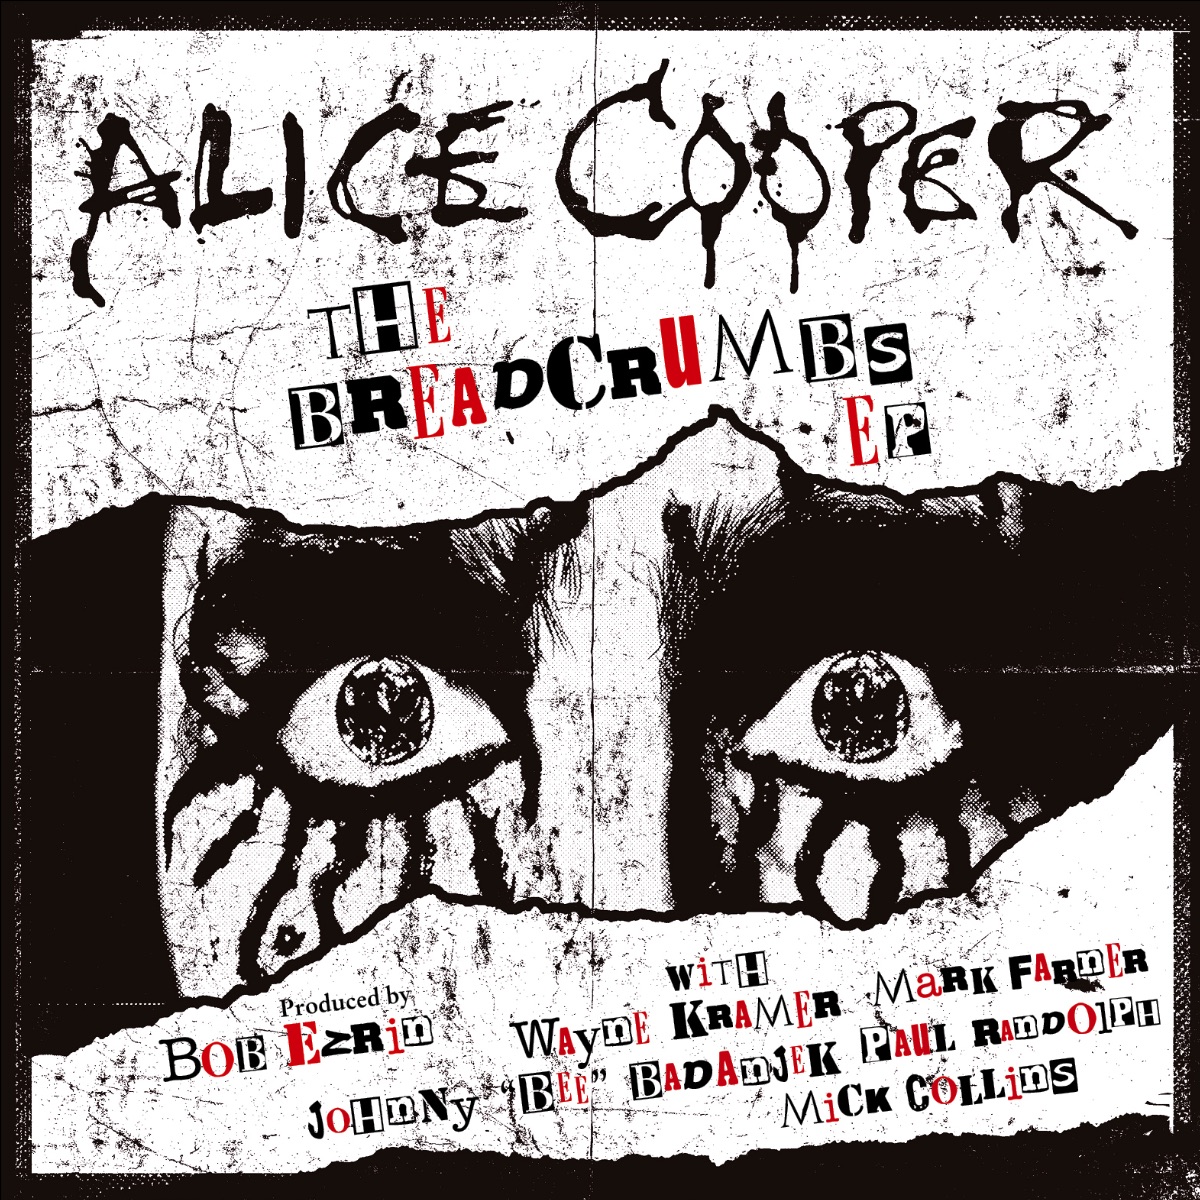 Alice Cooper to Releases "Breadcrumbs" EP on Friday the 13th